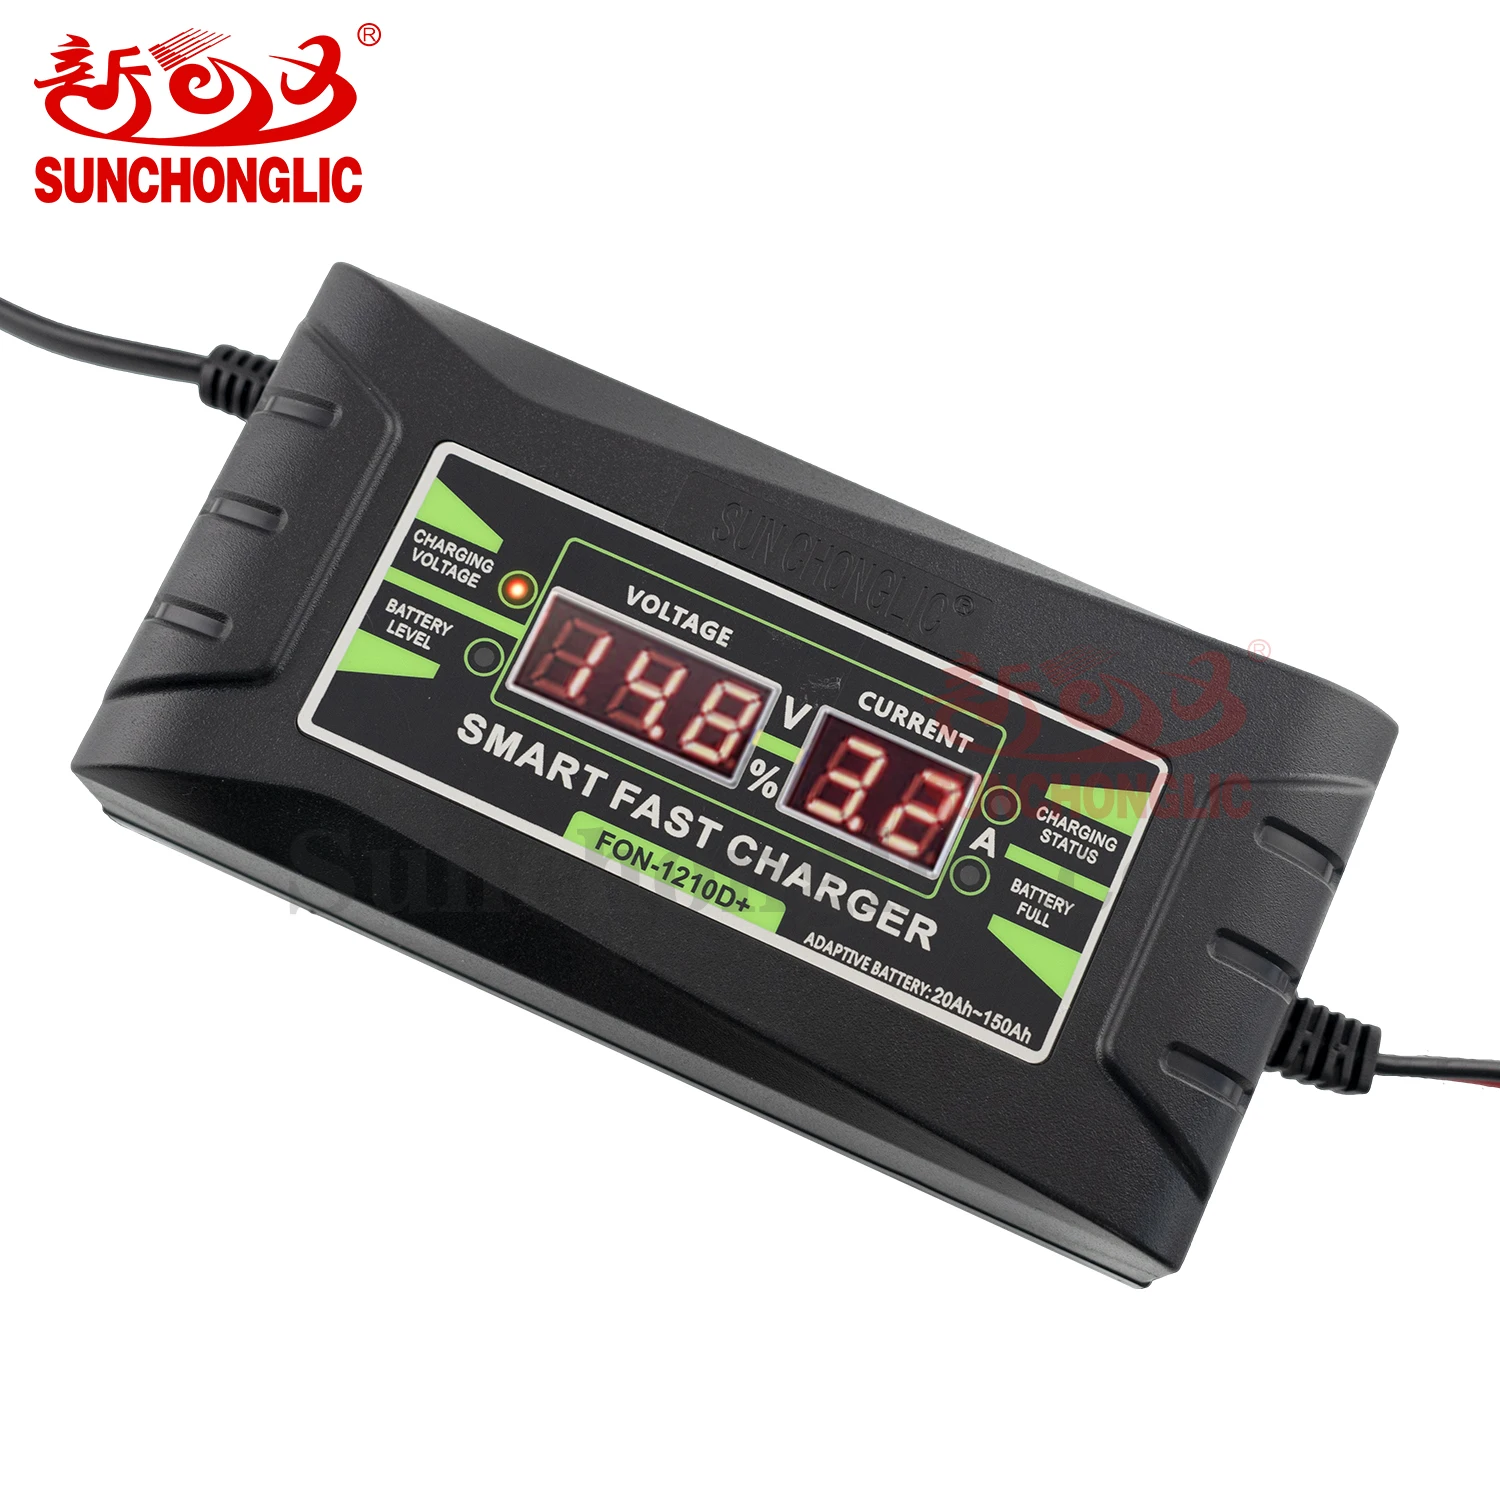 SON-1206D - AGM/GEL Battery Charger - Foshan Suoer Electronic